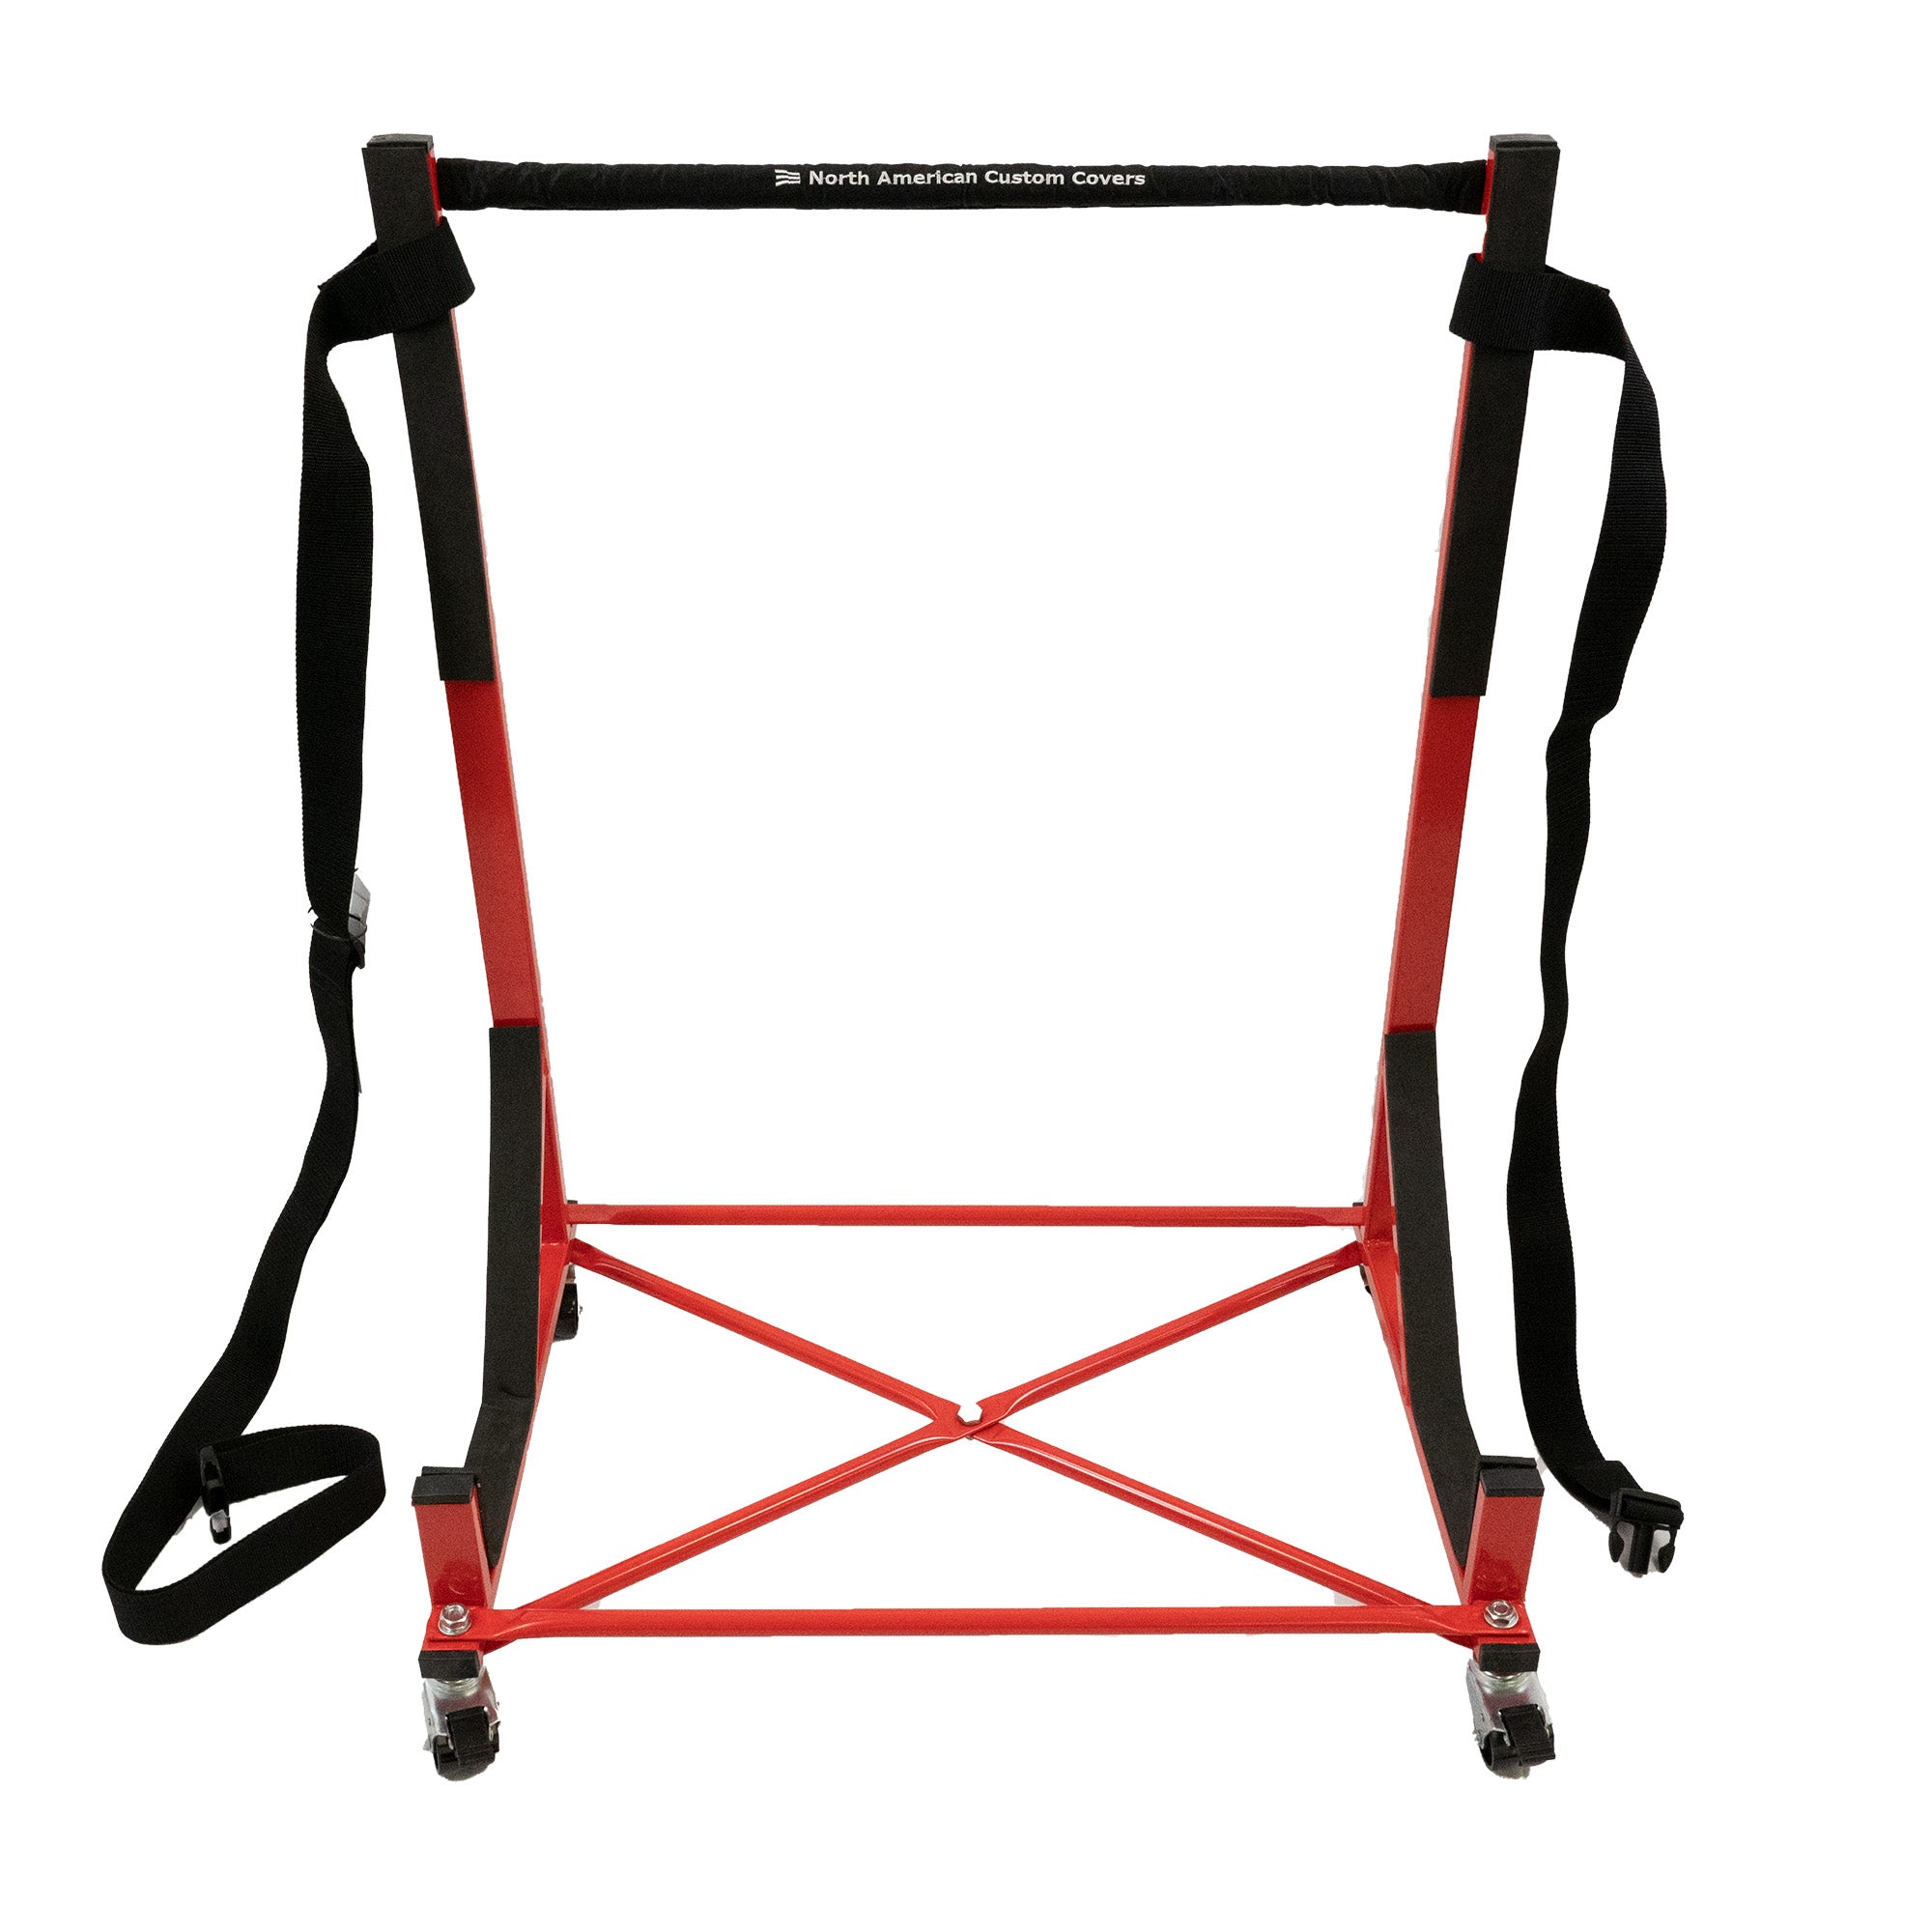 Chevy / Chevrolet Corvette Heavy-duty Hardtop Stand Trolley Cart Rack (Red) with Securing Harness and Hard Top Dust Cover (050R)